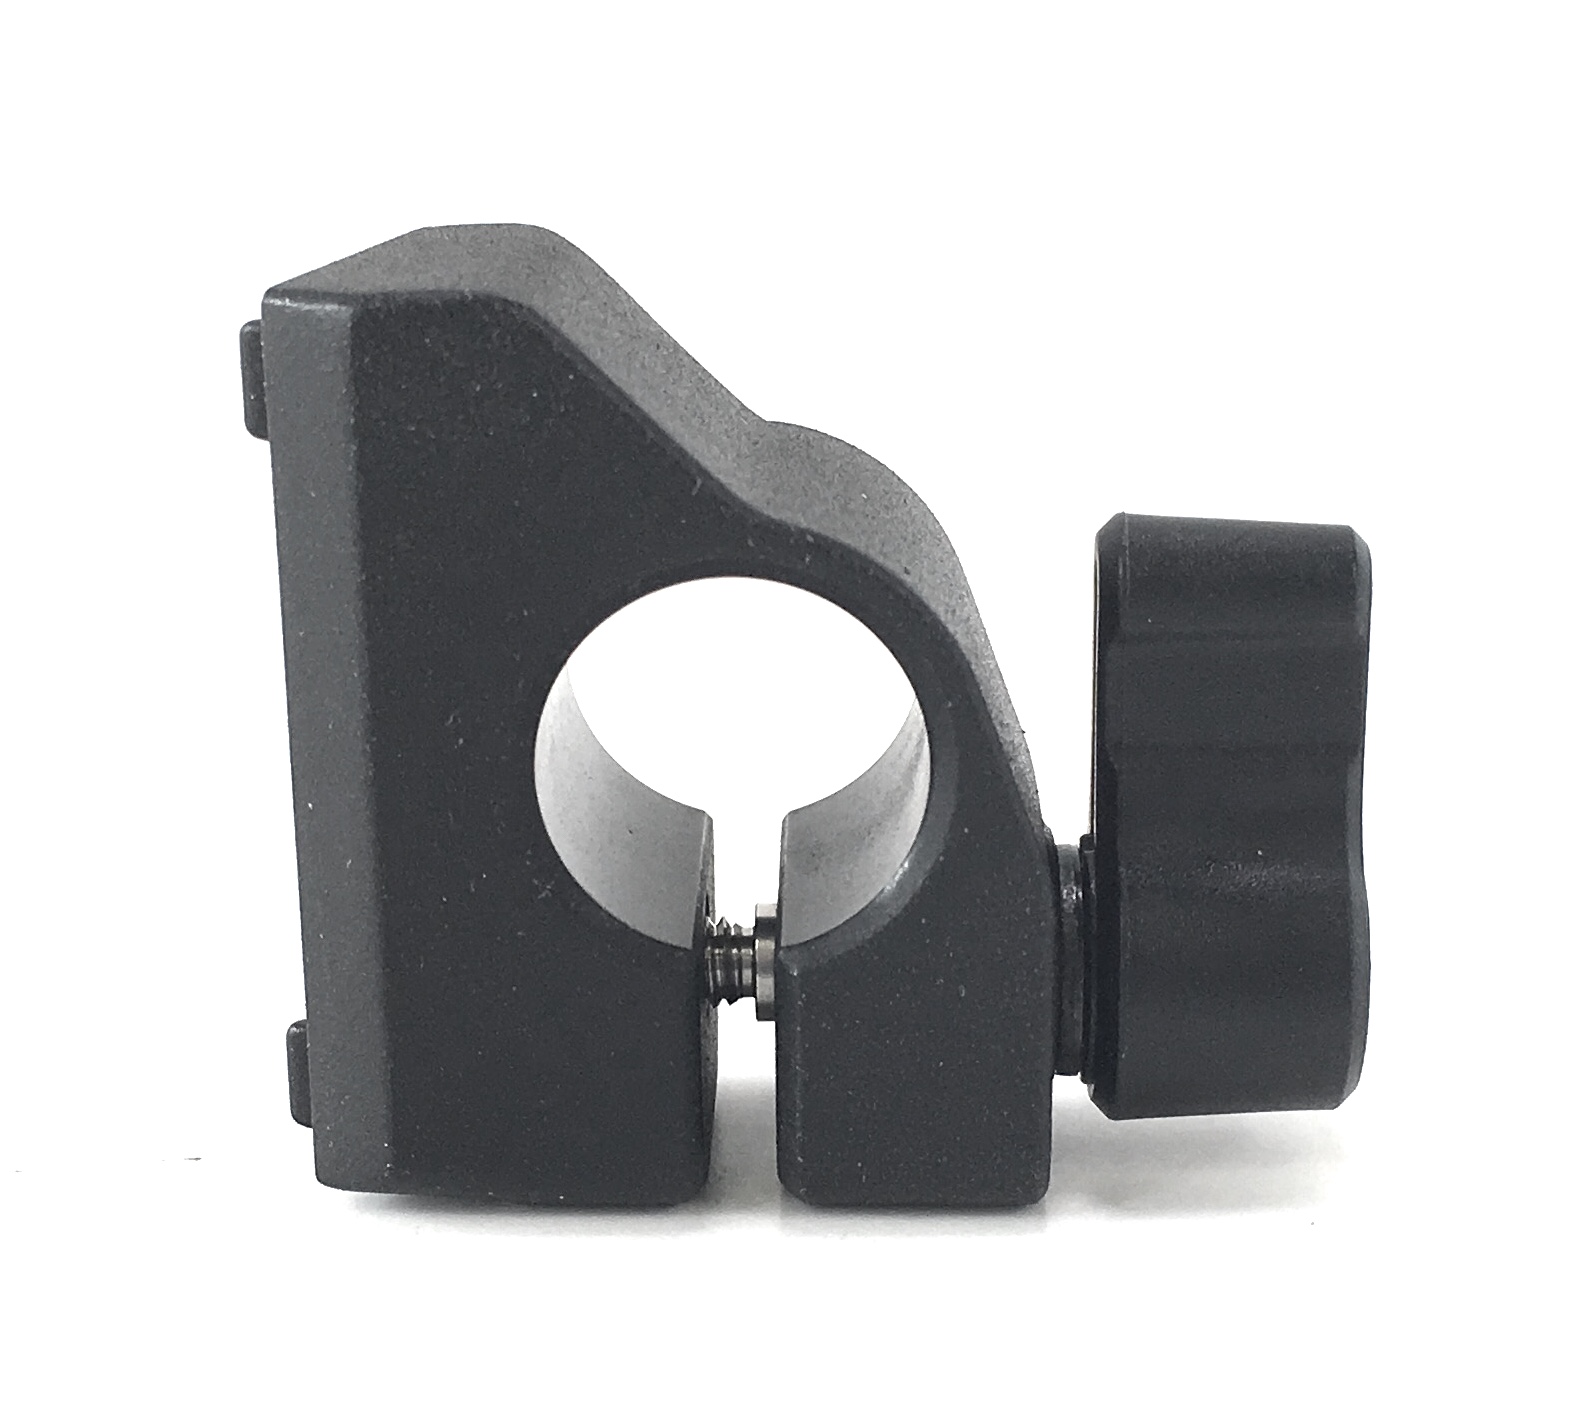 Original Microphone Holder Base that fits on the Sony PXW-FS7M2 camcorder. It is a genuine Sony part, sourced directly from Sony USA. Brand new factory fresh. Free Shipping.